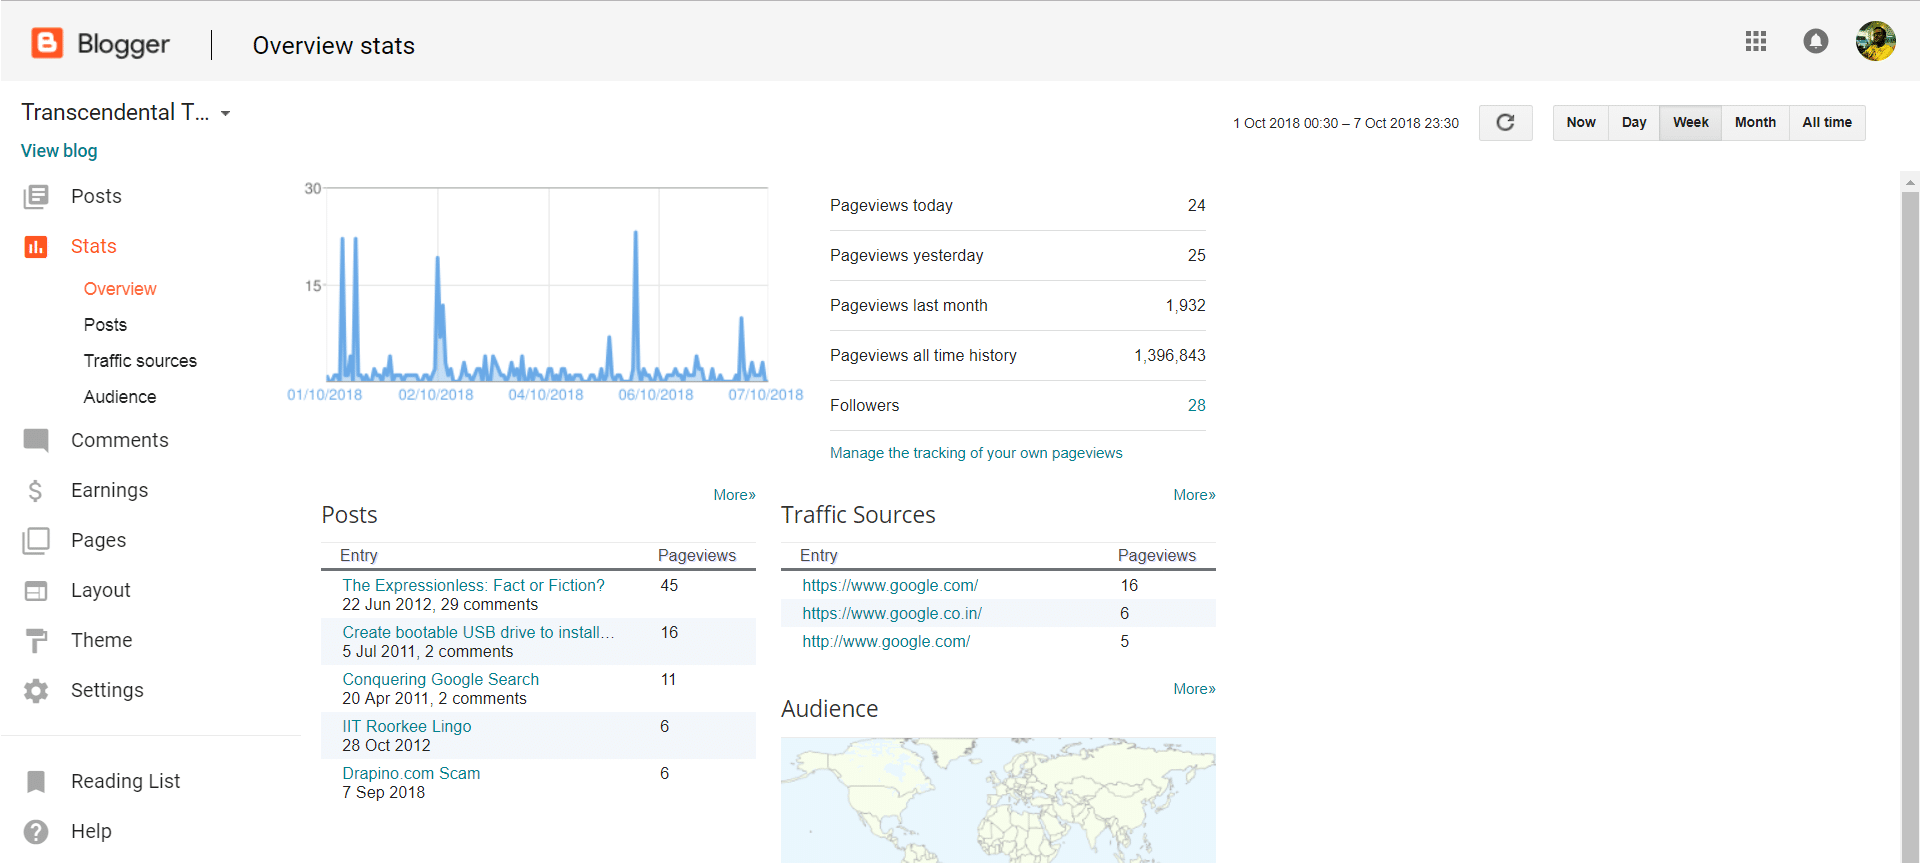 Blogger dashboard with statistics and other options.